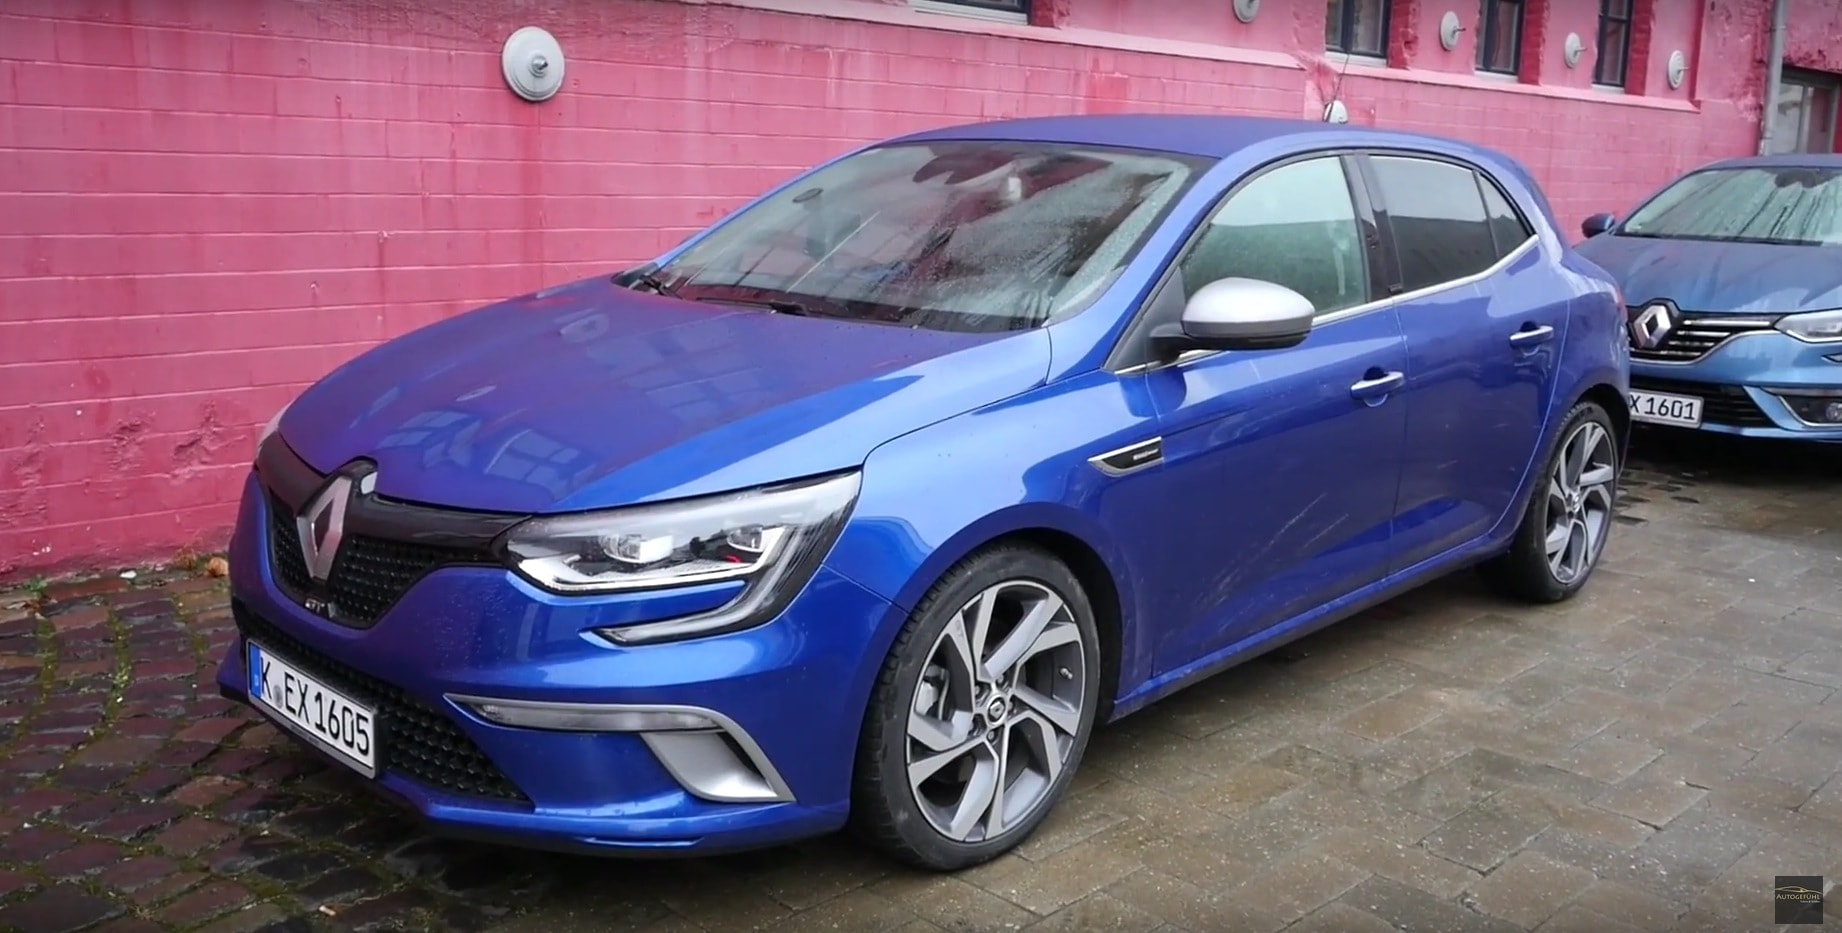 2016 Renault Mégane GT review: Clever tech, four-wheel steering